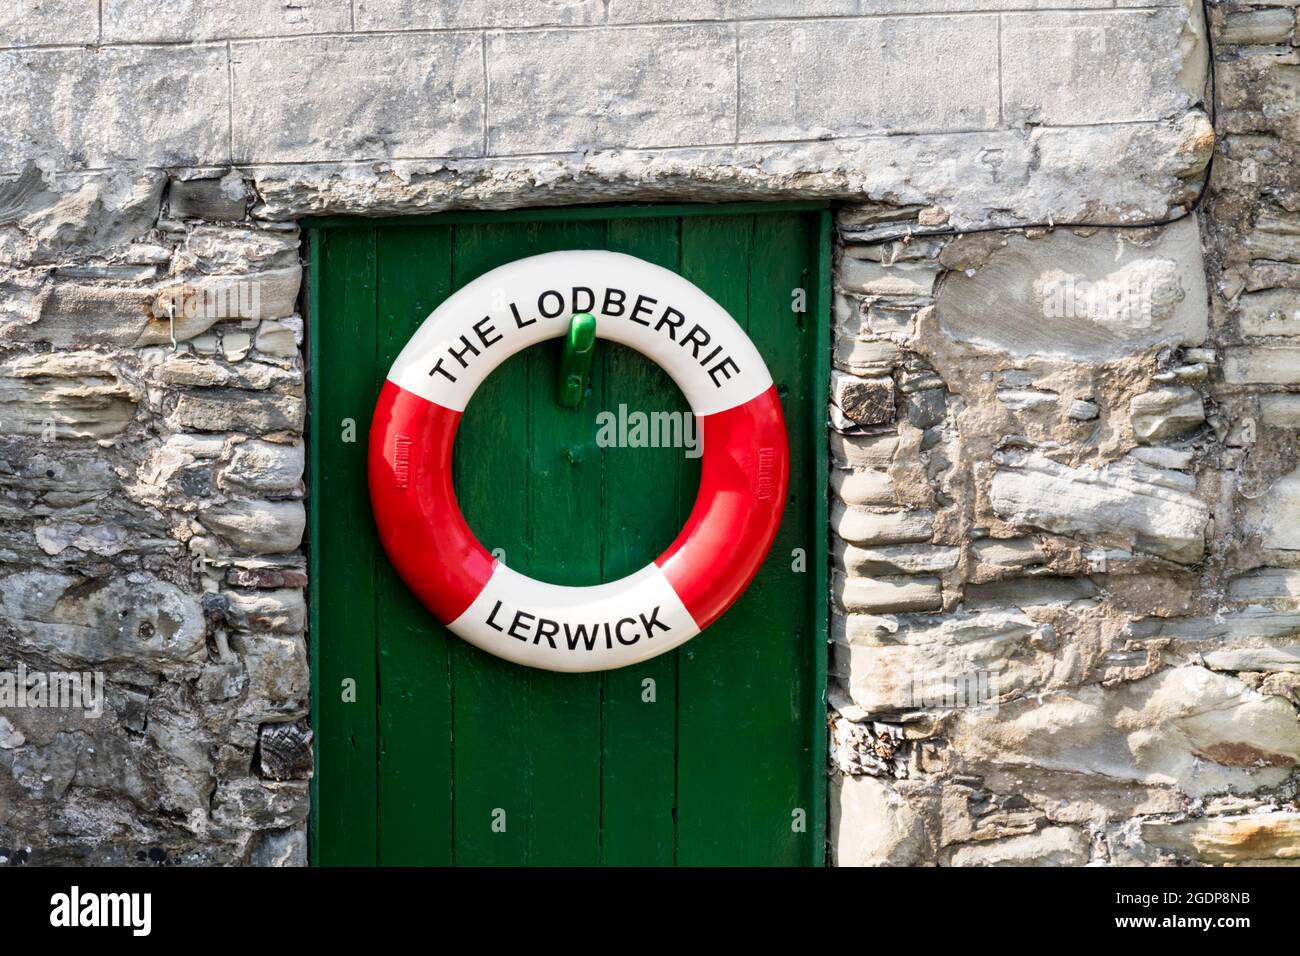 The Lodberrie in Lerwick is the fictional home of Jimmy Perez in the TV detective series Shetland. Stock Photo